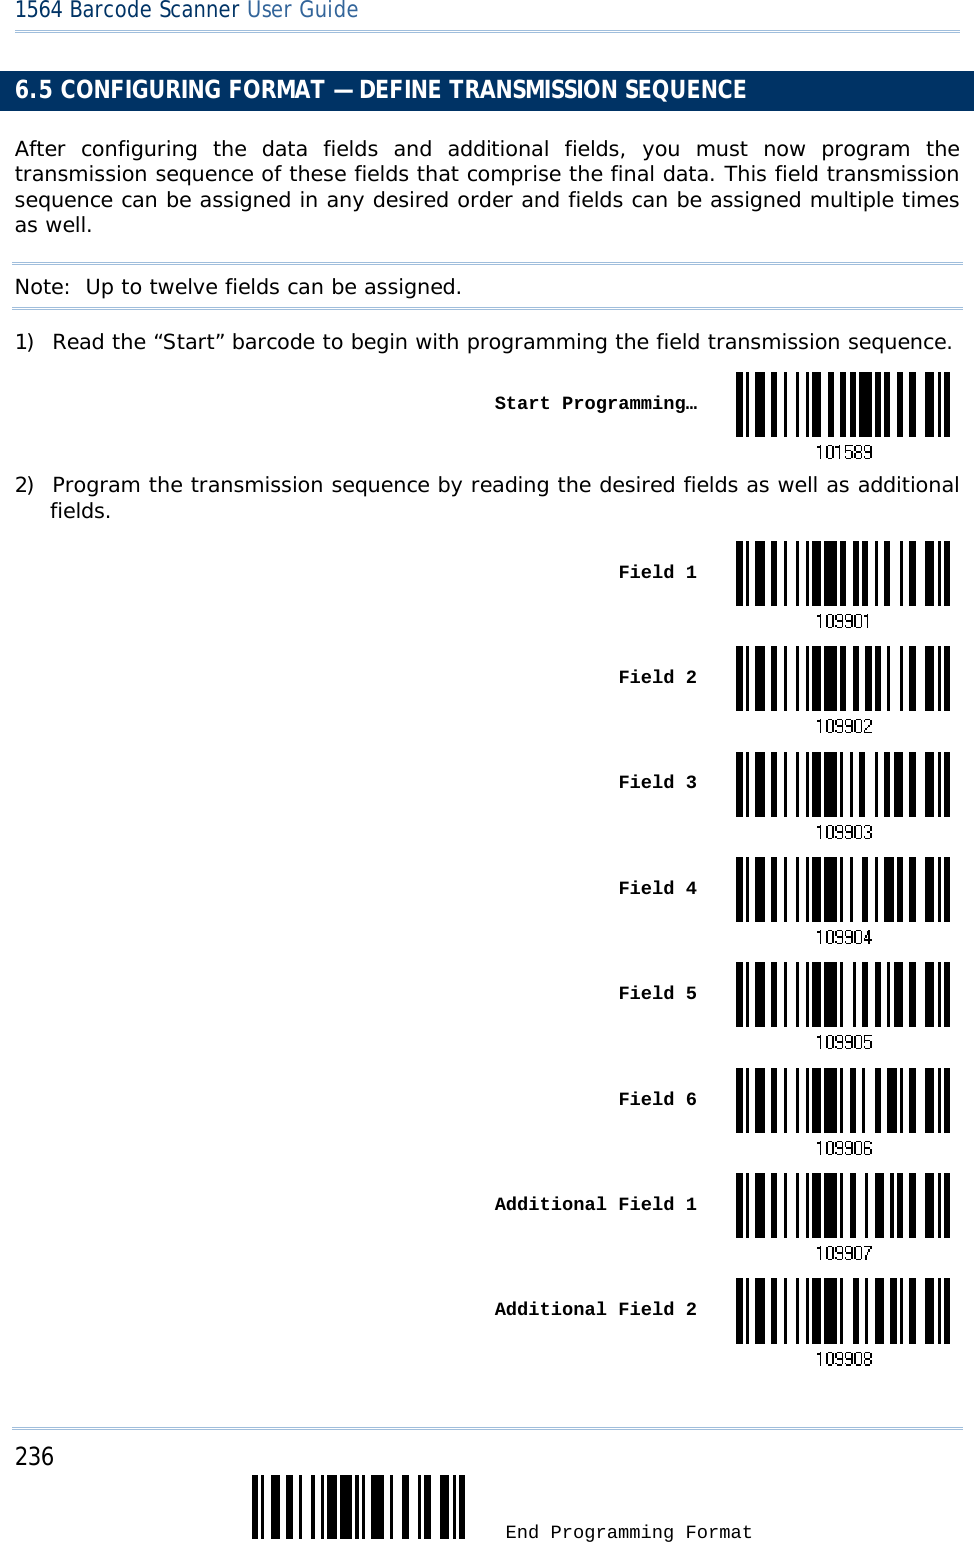 236  End Programming Format 1564 Barcode Scanner User Guide  6.5 CONFIGURING FORMAT — DEFINE TRANSMISSION SEQUENCE After configuring the data fields and additional fields, you must now program the transmission sequence of these fields that comprise the final data. This field transmission sequence can be assigned in any desired order and fields can be assigned multiple times as well.  Note:  Up to twelve fields can be assigned. 1) Read the “Start” barcode to begin with programming the field transmission sequence.  Start Programming…2) Program the transmission sequence by reading the desired fields as well as additional fields.  Field 1 Field 2 Field 3 Field 4 Field 5 Field 6 Additional Field 1 Additional Field 2